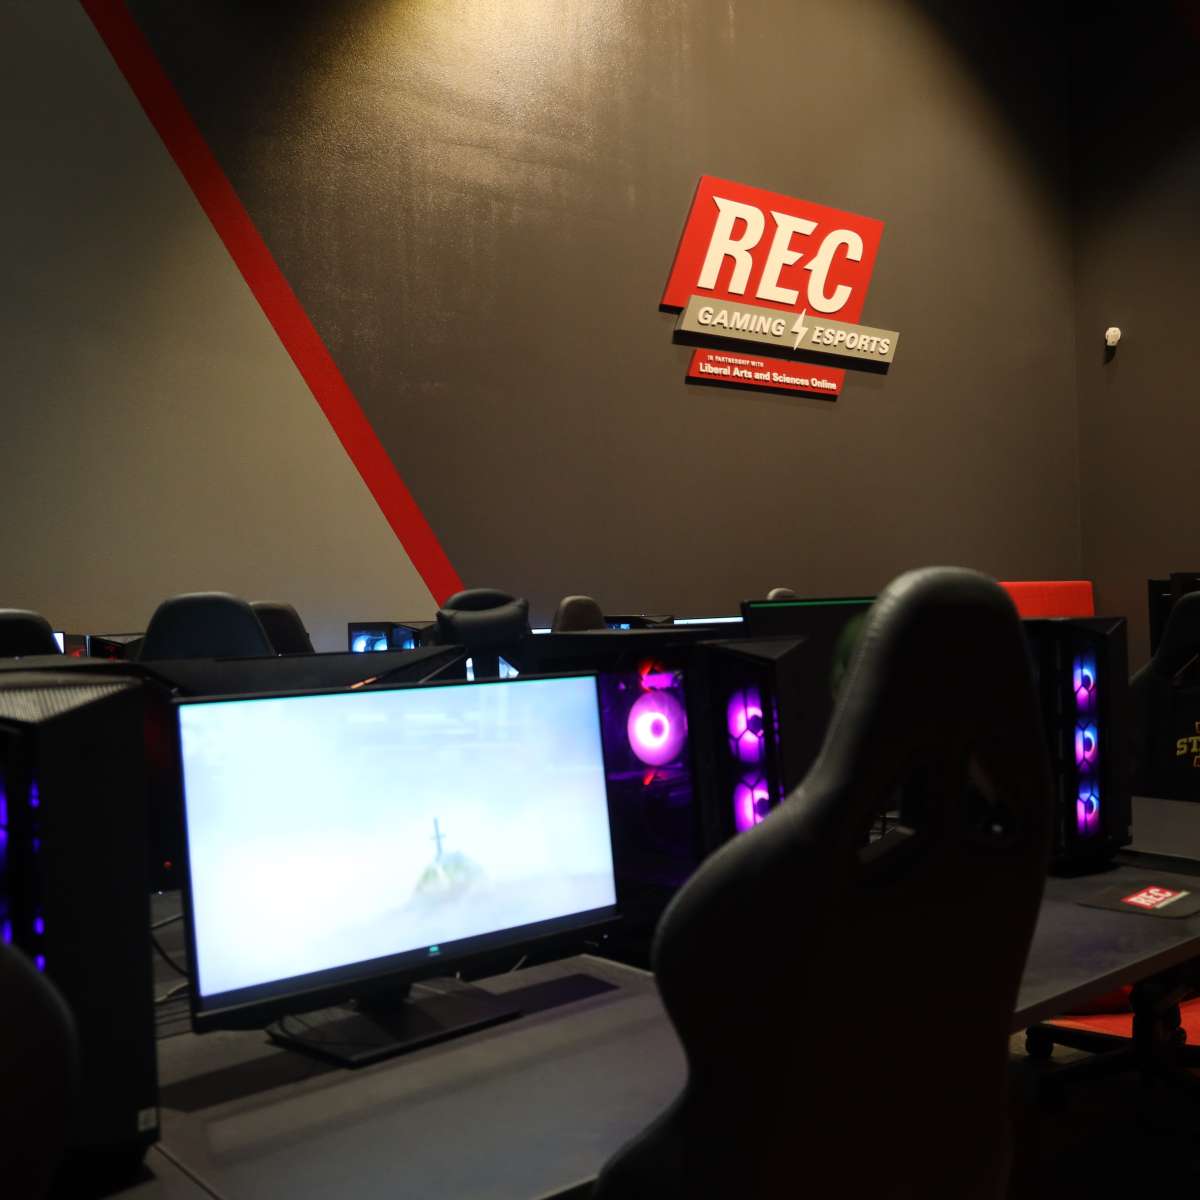 a photo of the gaming & esports room